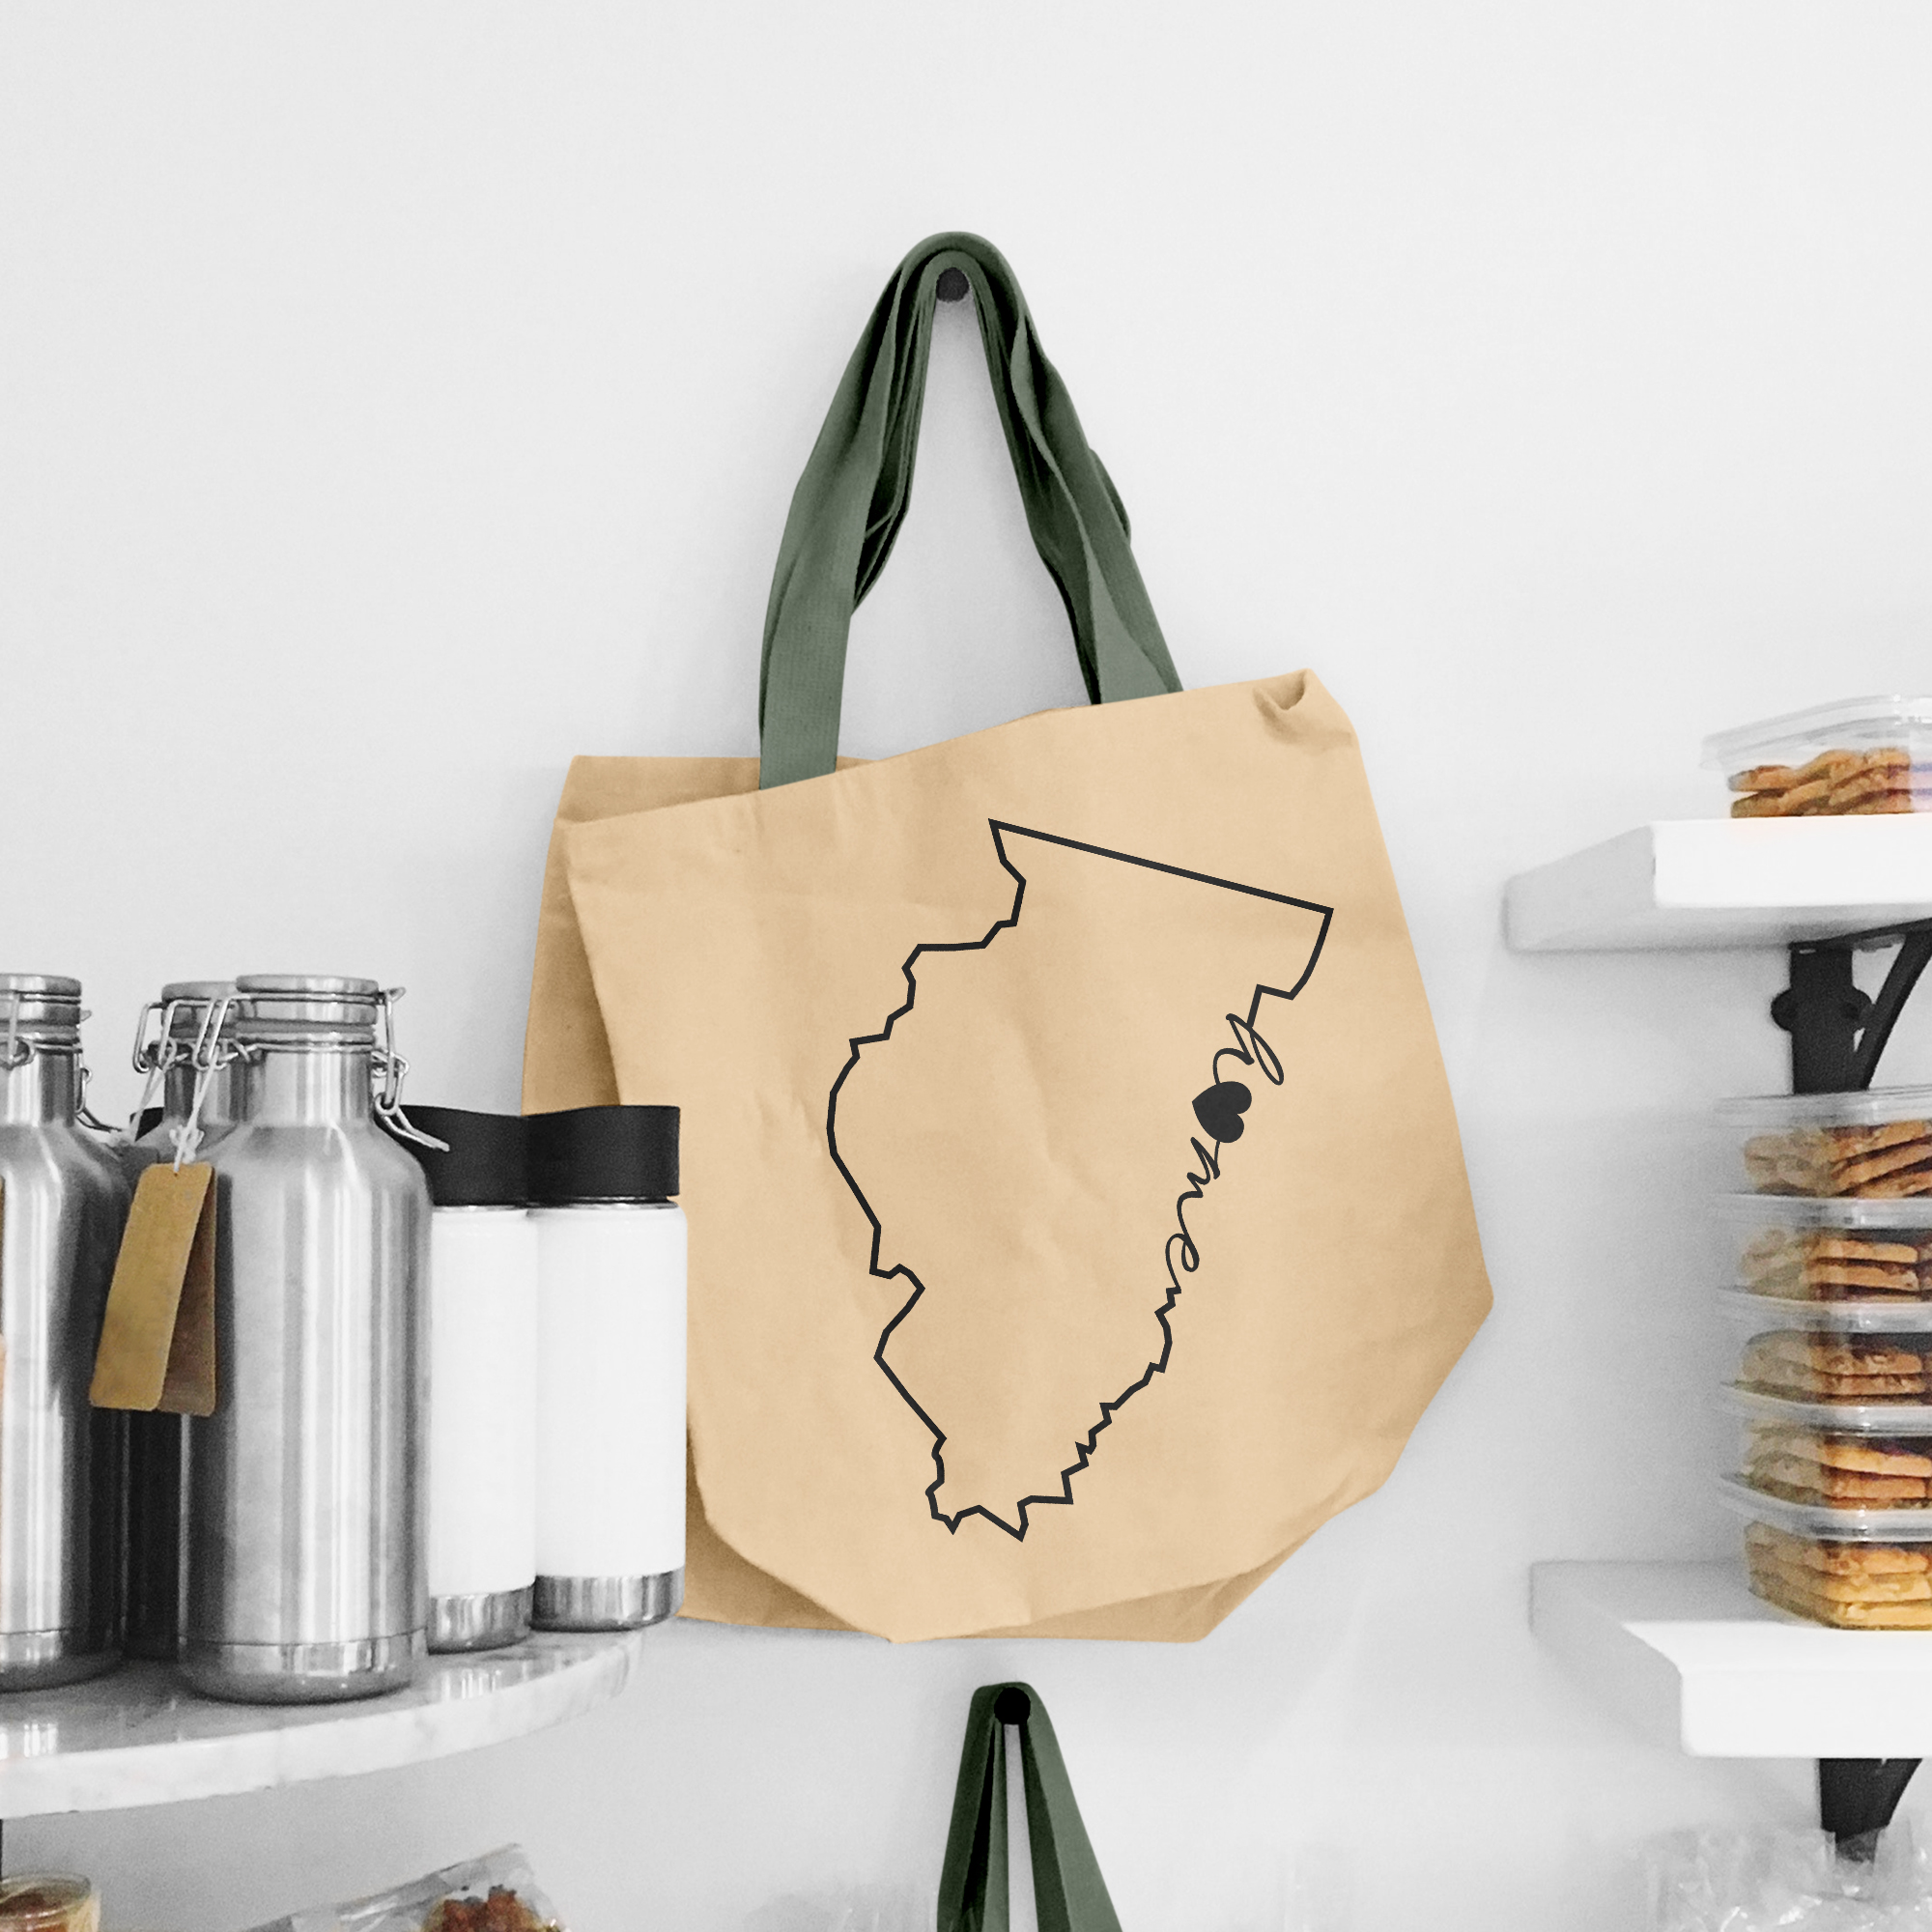 Black illustration of map of Llinois on the beige shopping bag with dirty green handle.